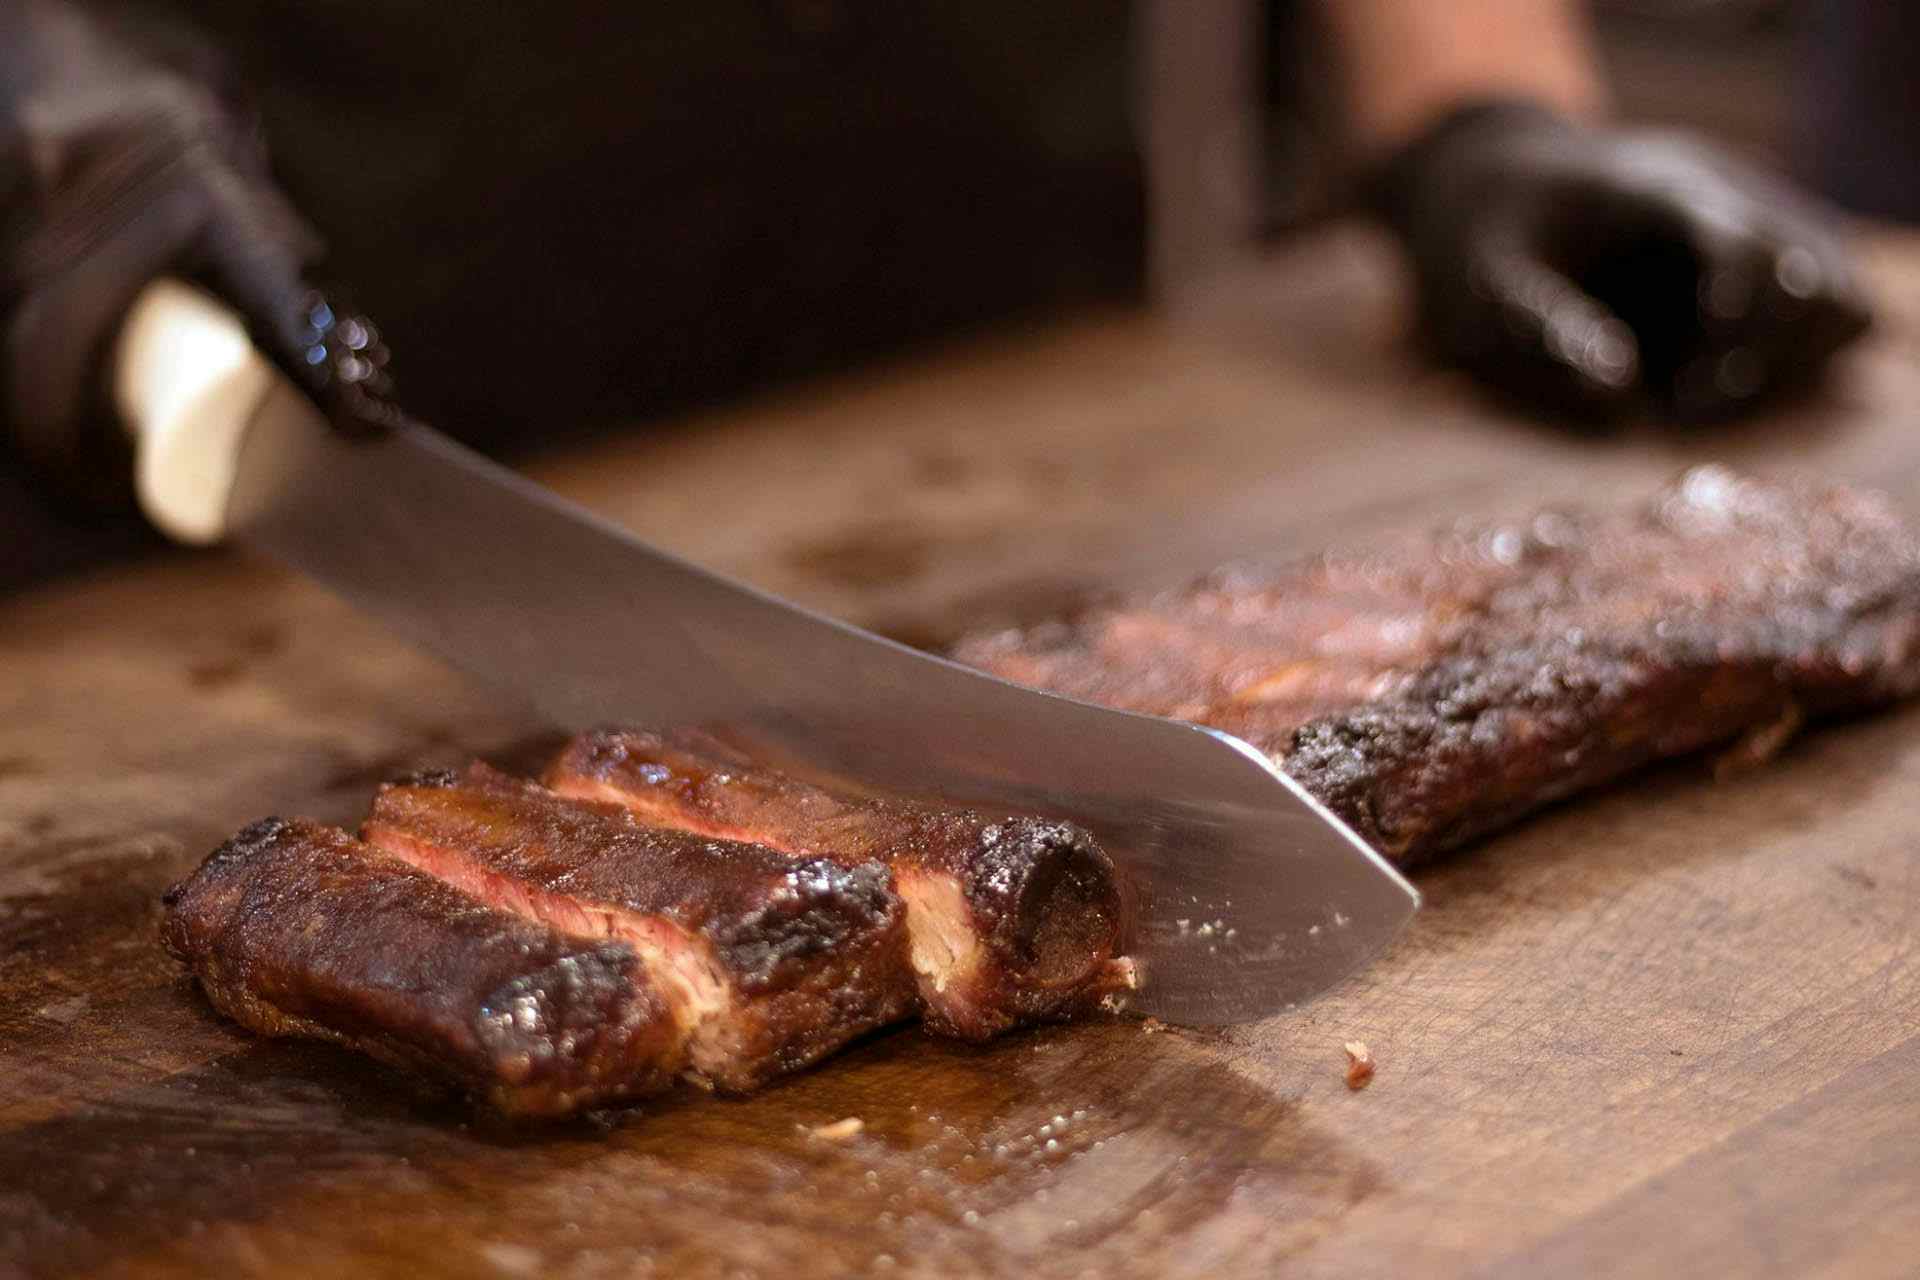 Lexington Gets Slow Smoked Texas Barbecue with New Dickey’s Barbecue Pit